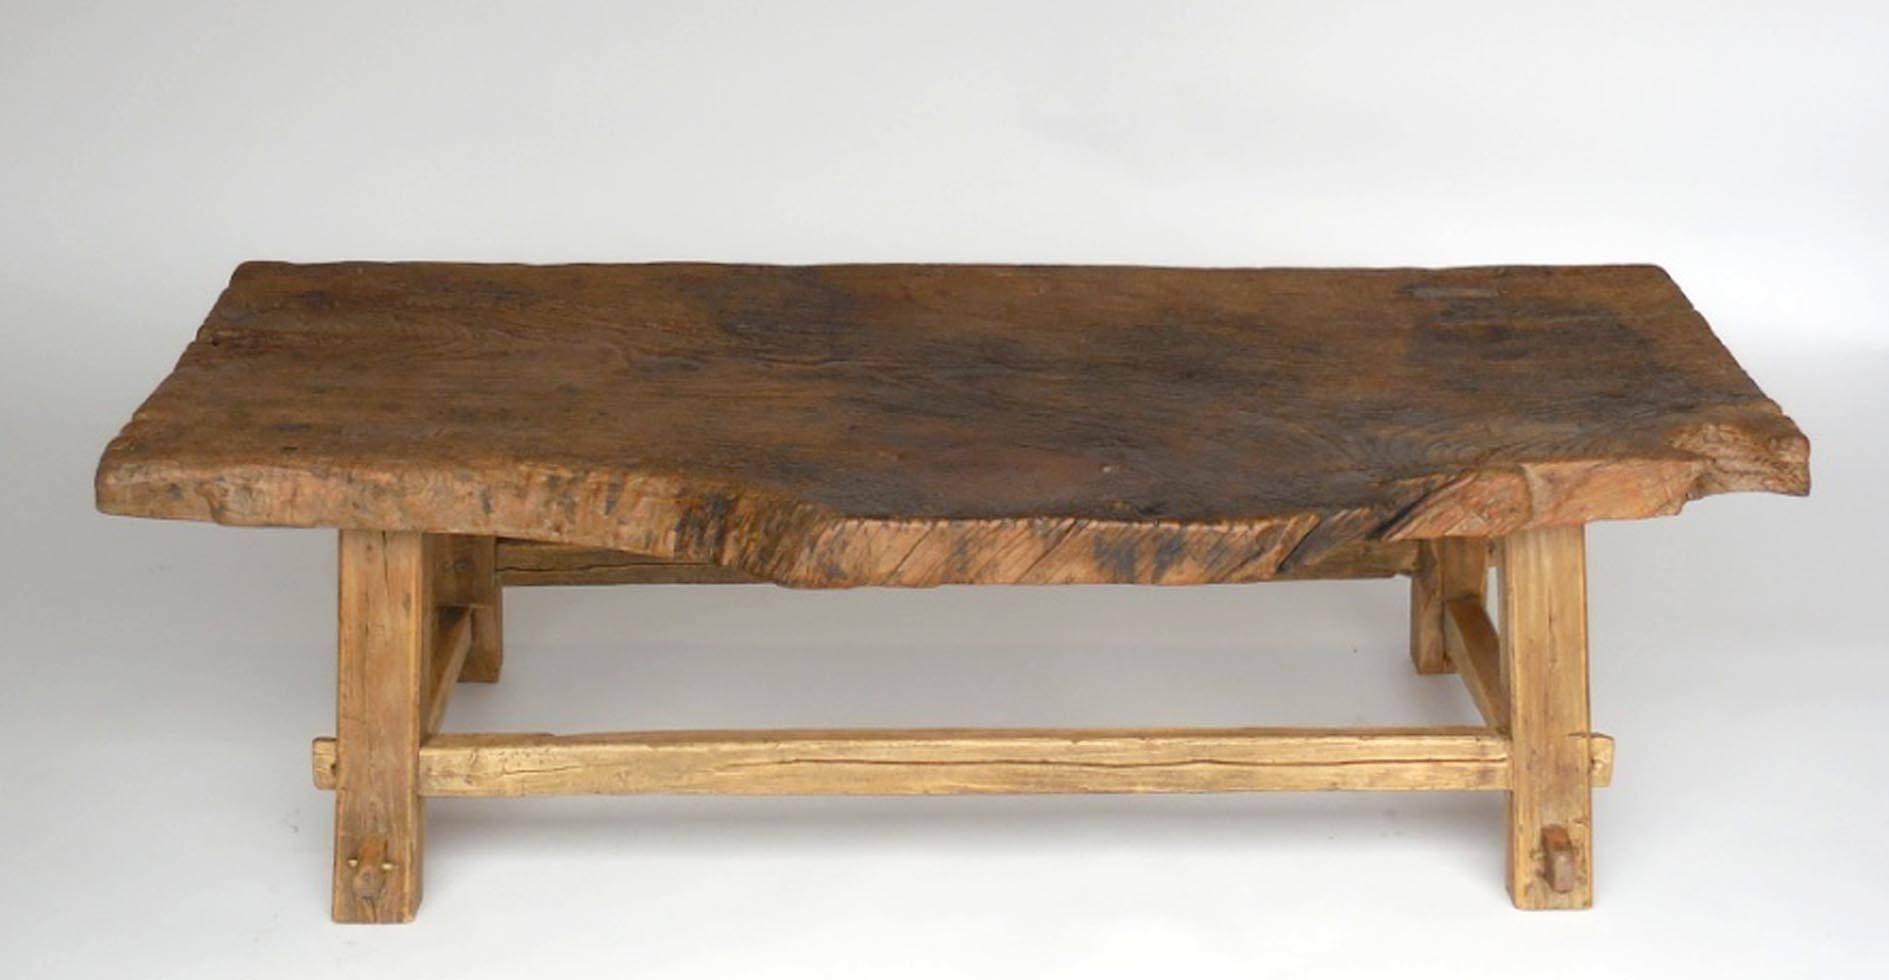 A 200 year old Northern Japanese elm low table/bench. Edo period. One slab of live edge wood atop mortise and tenon legs. All original, 3" thick top. Natural patina.